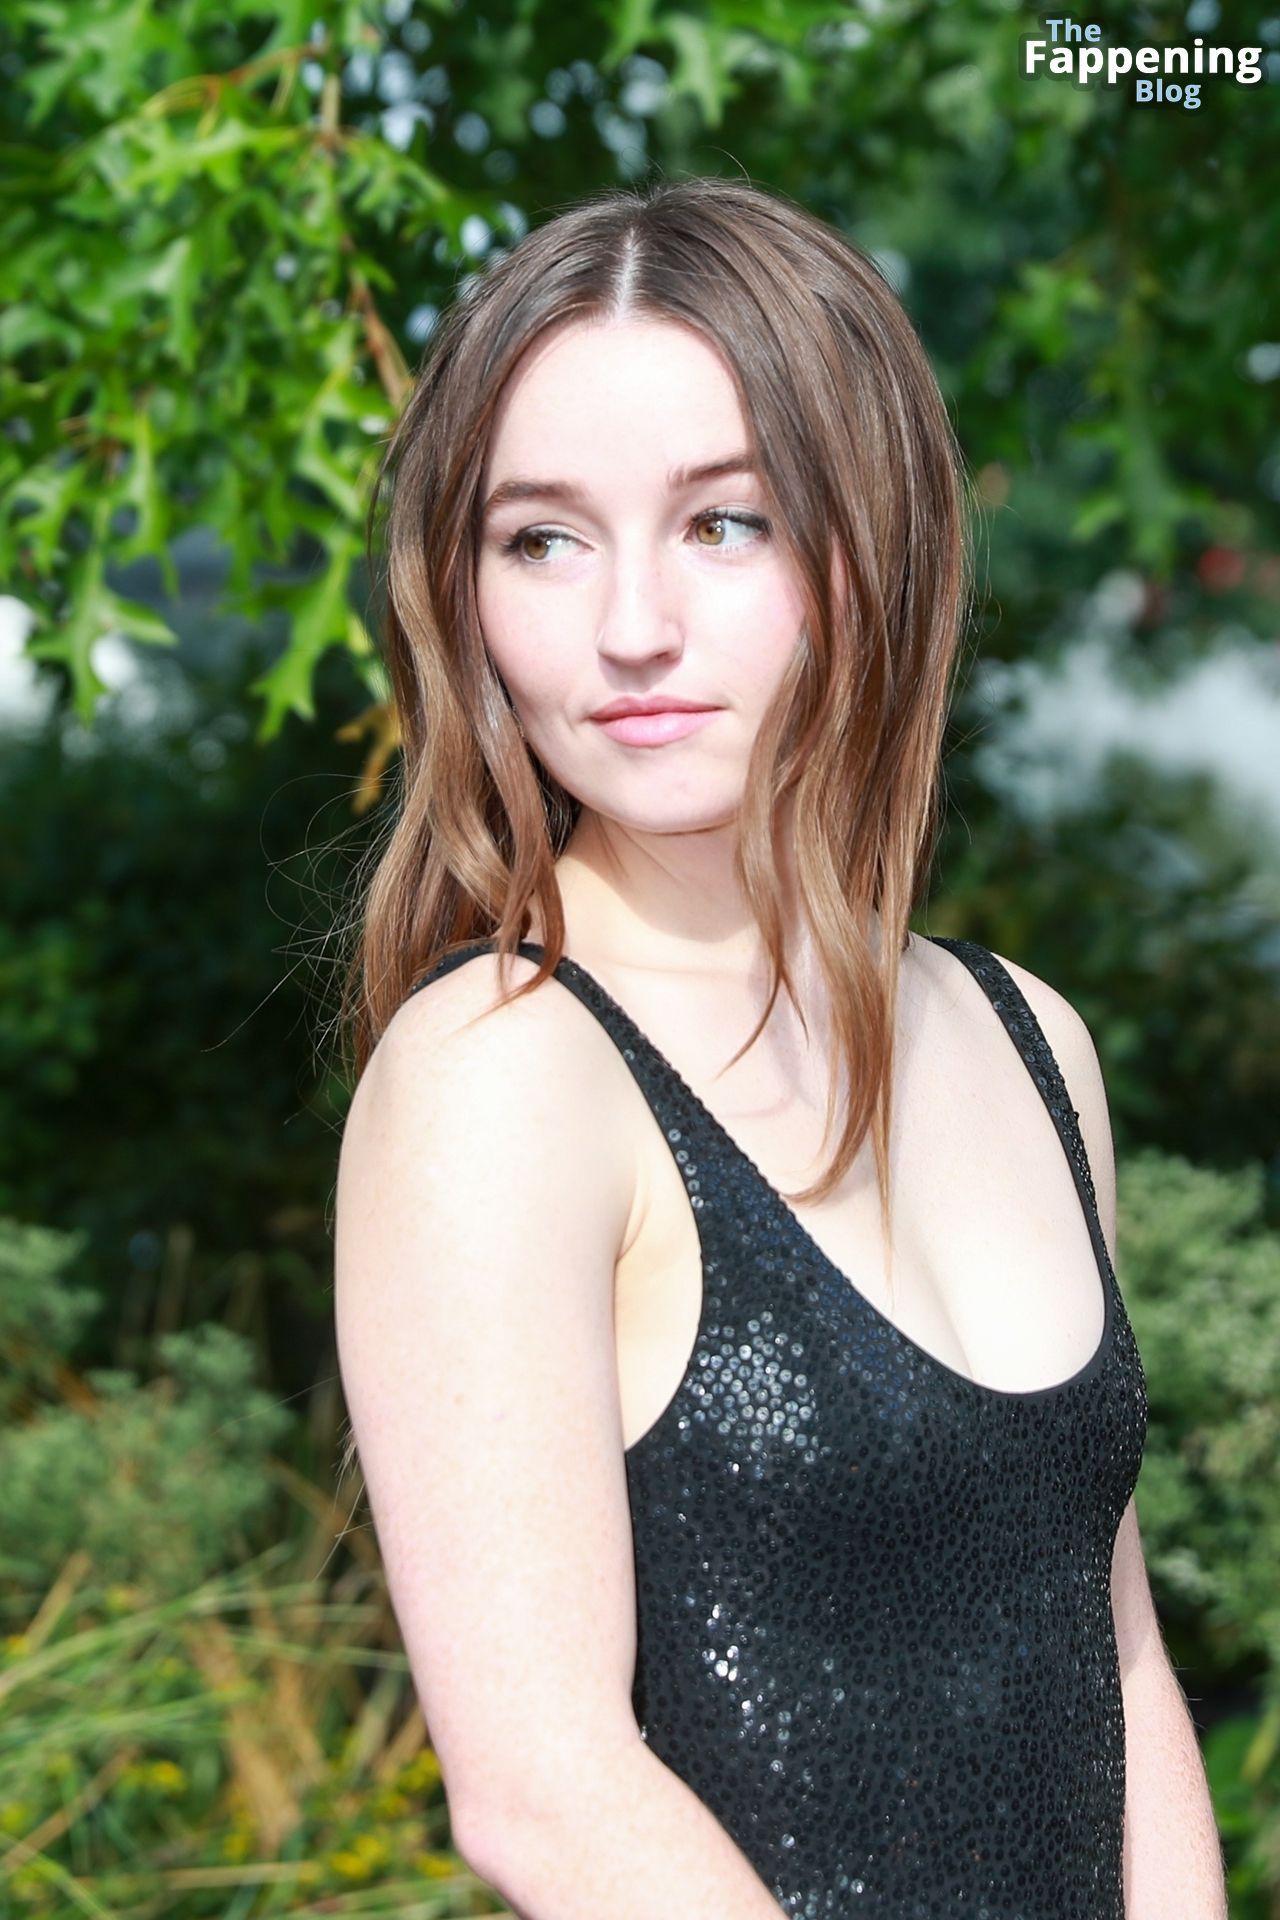 Kaitlyn-Dever-Sexy-9-The-Fappening-Blog.jpg